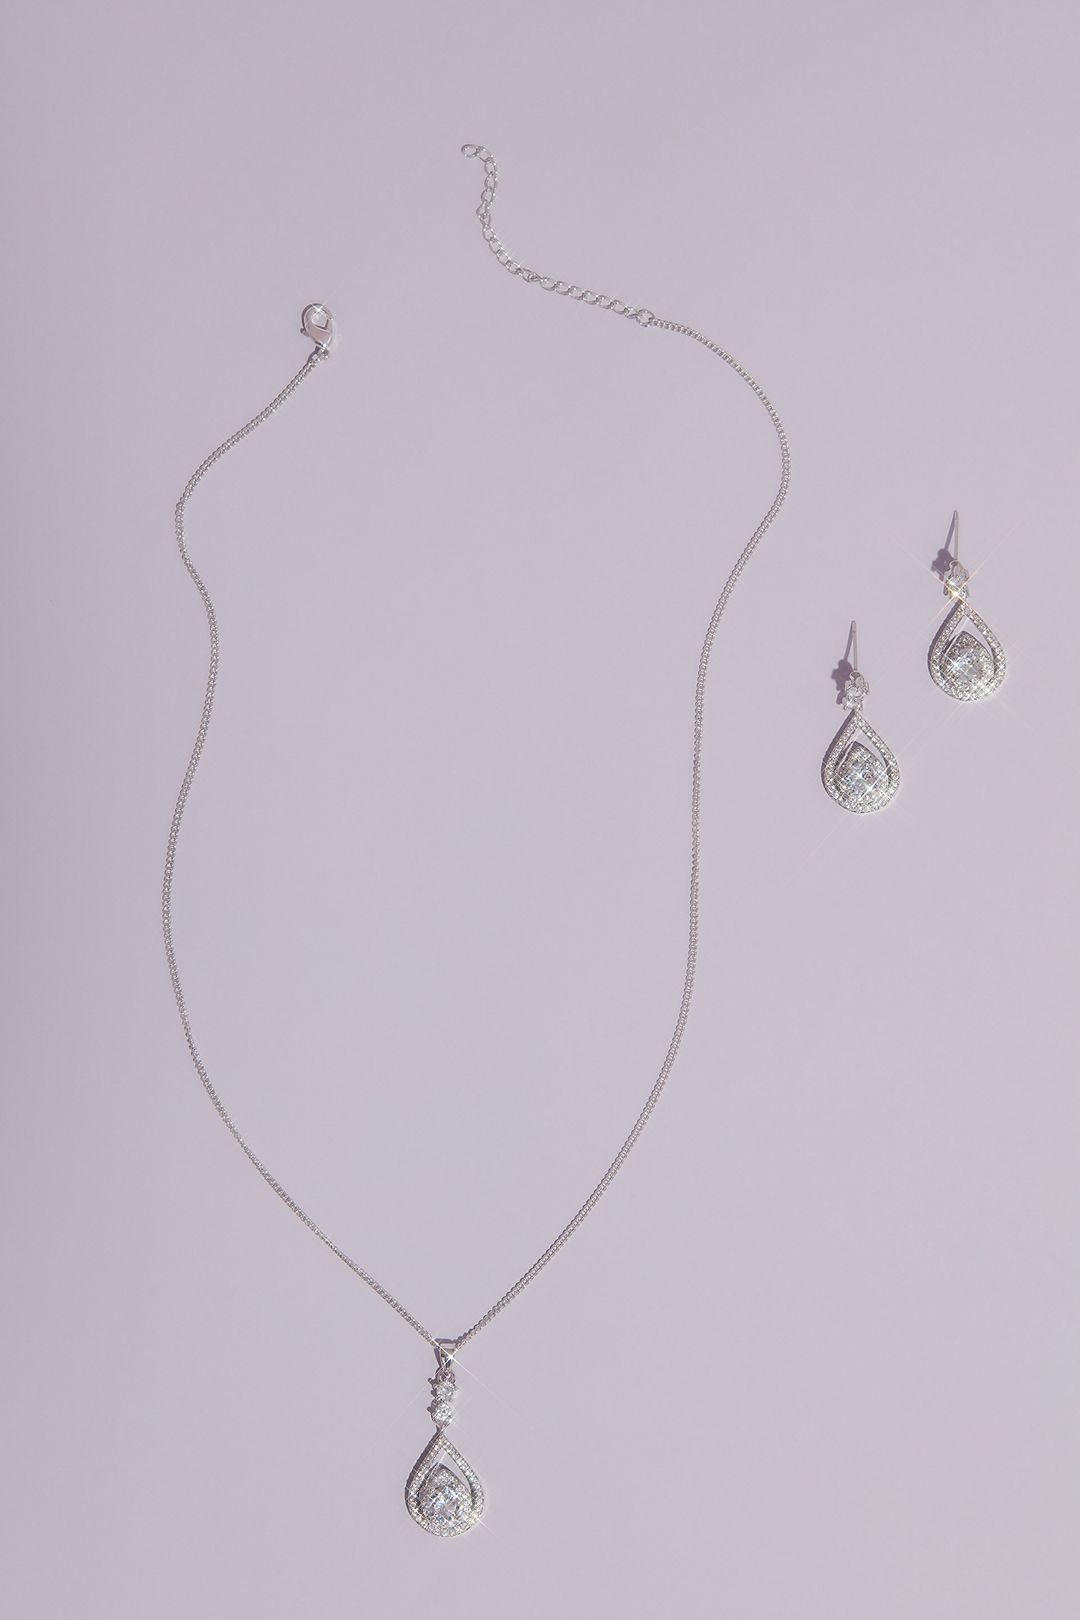 Pave Crystal Teardrop Earrings and Necklace Set Image 3